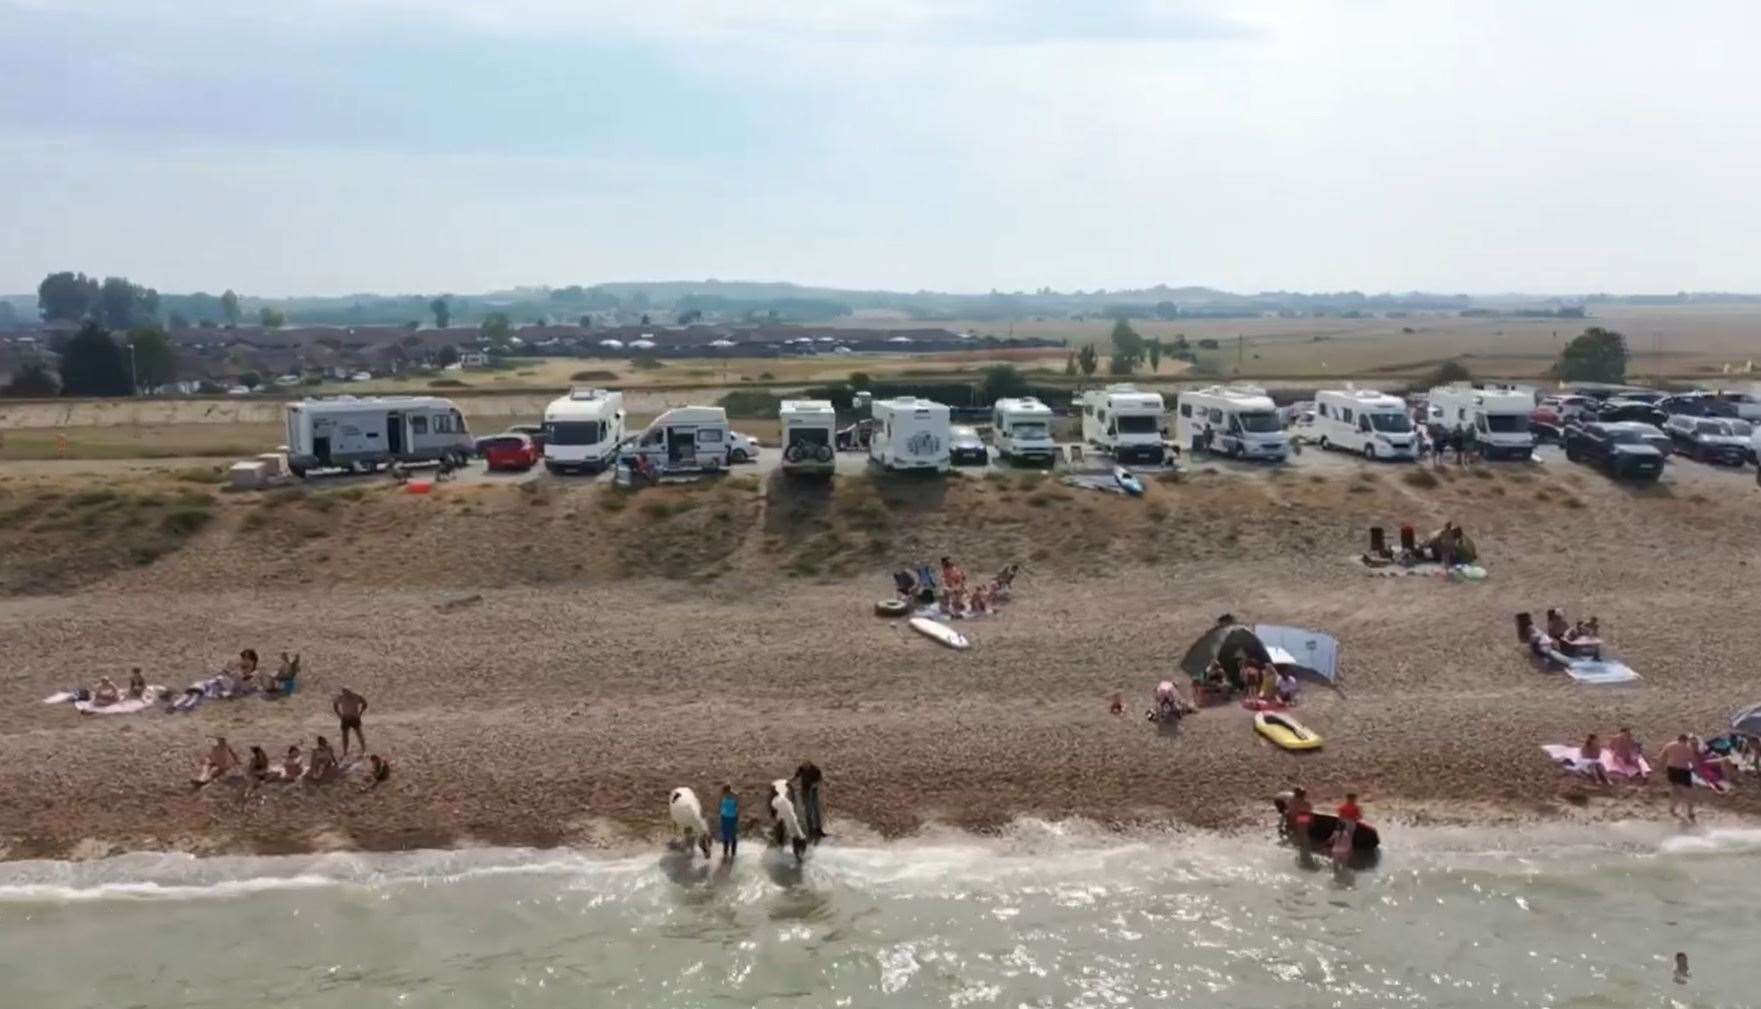 The Shingle Bank at Minster on the Isle of Sheppey showing cars parked along the top. Motorhomes are now restricted to a small area near the White House. Drone picture: Ricky Wooding